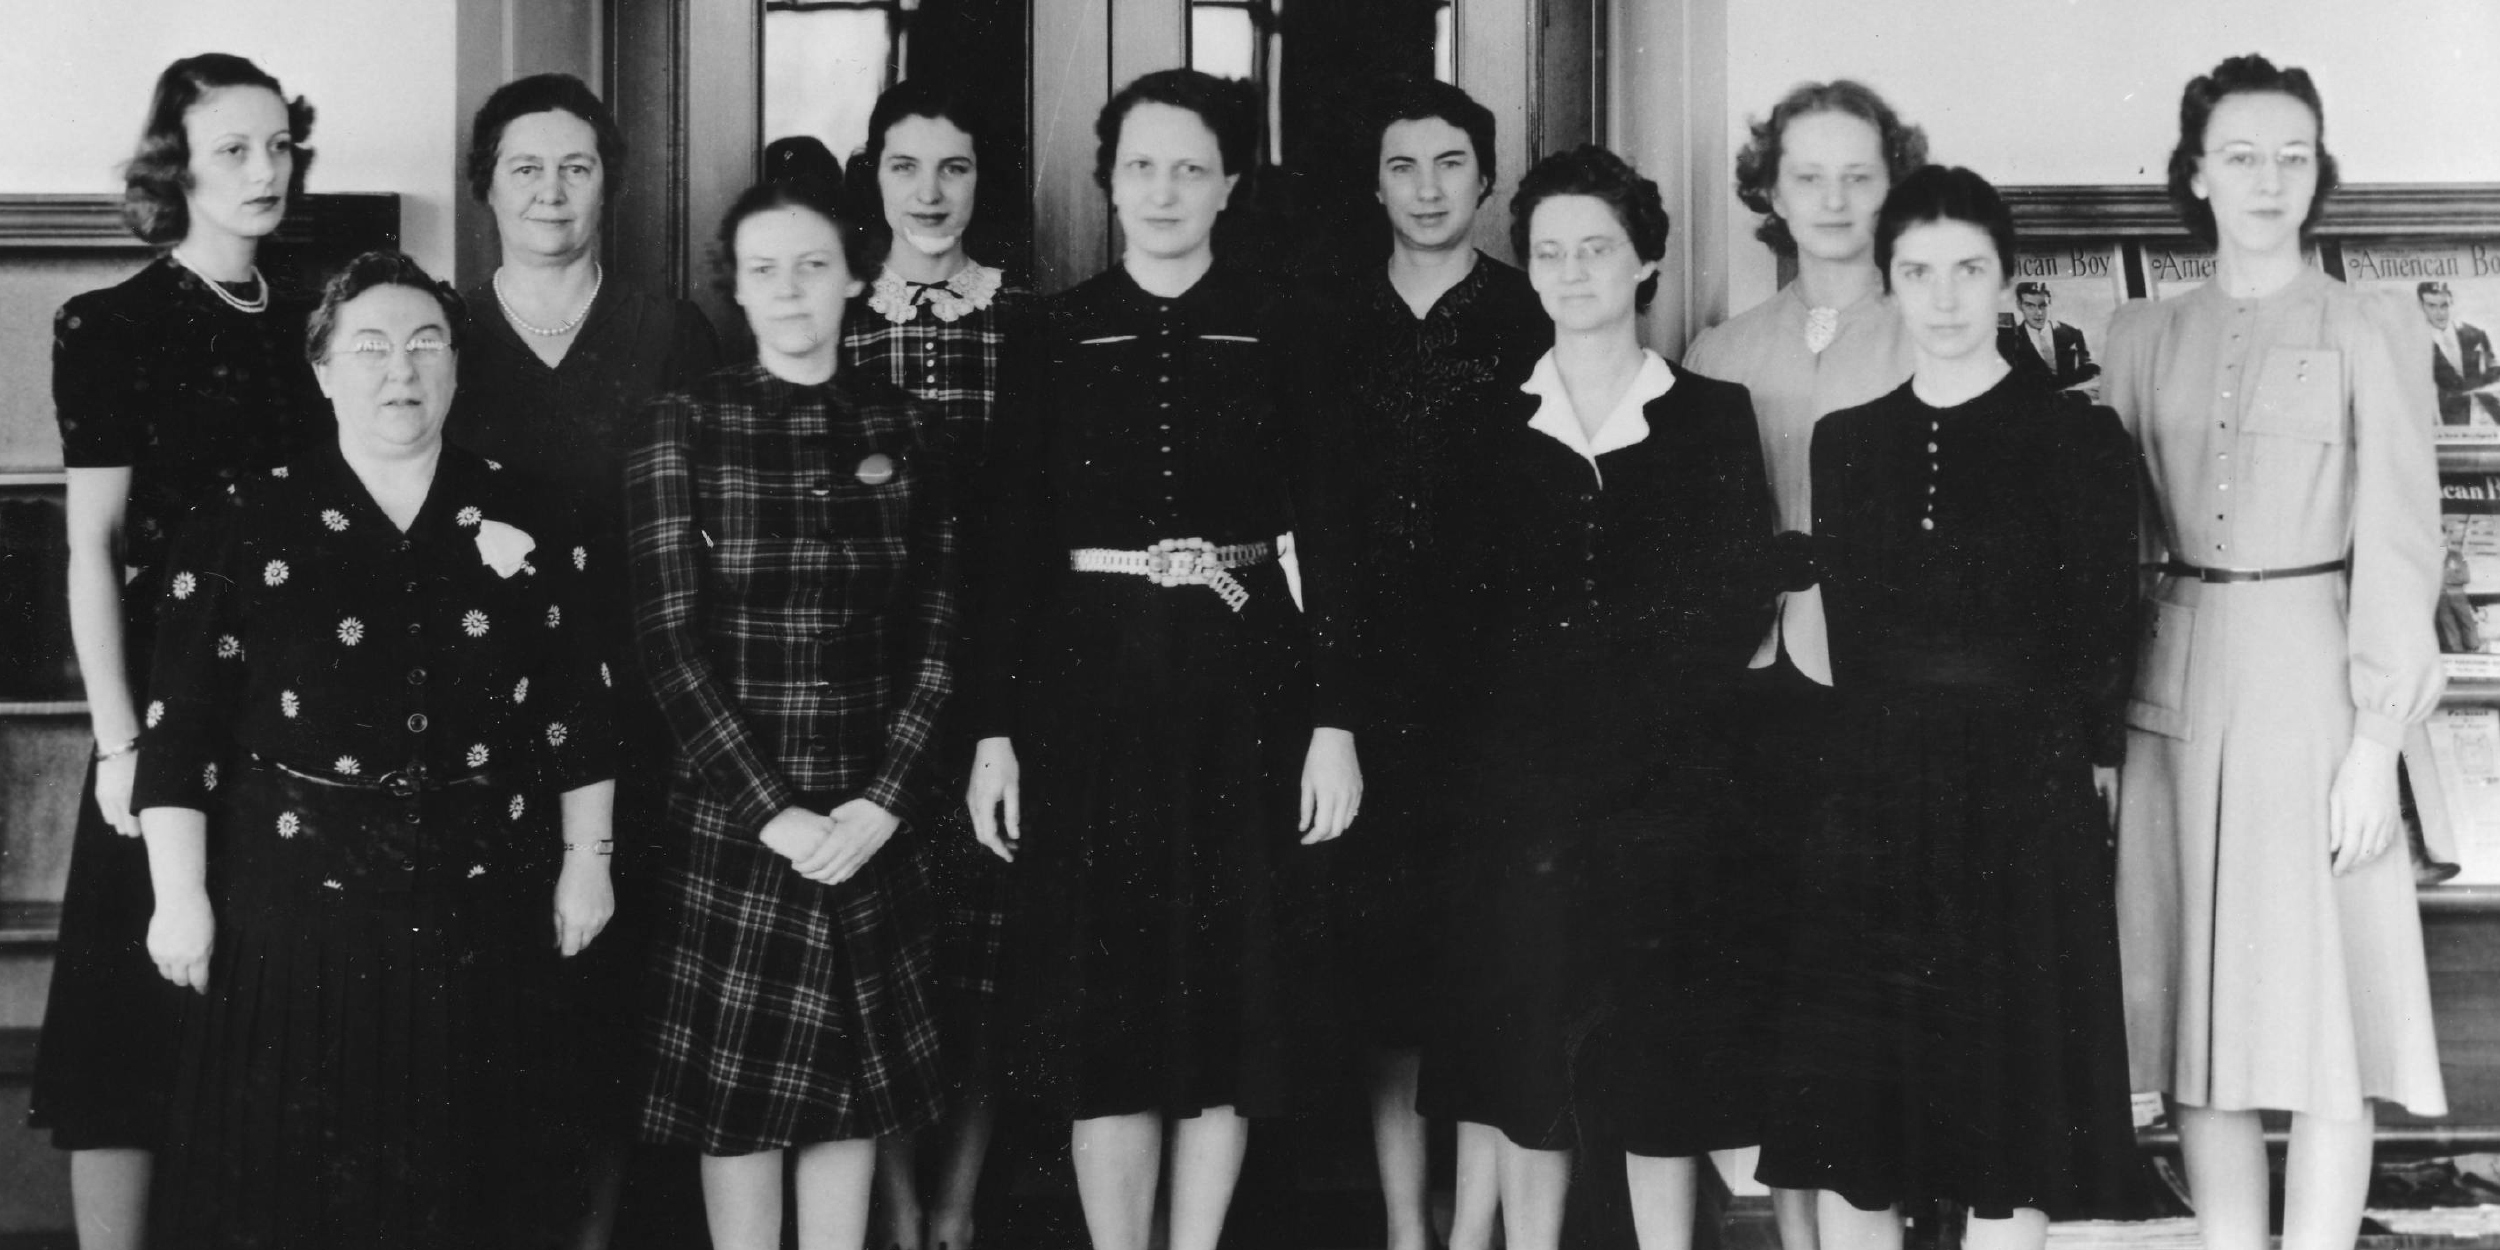 A photo of the library staff in the 1940s.